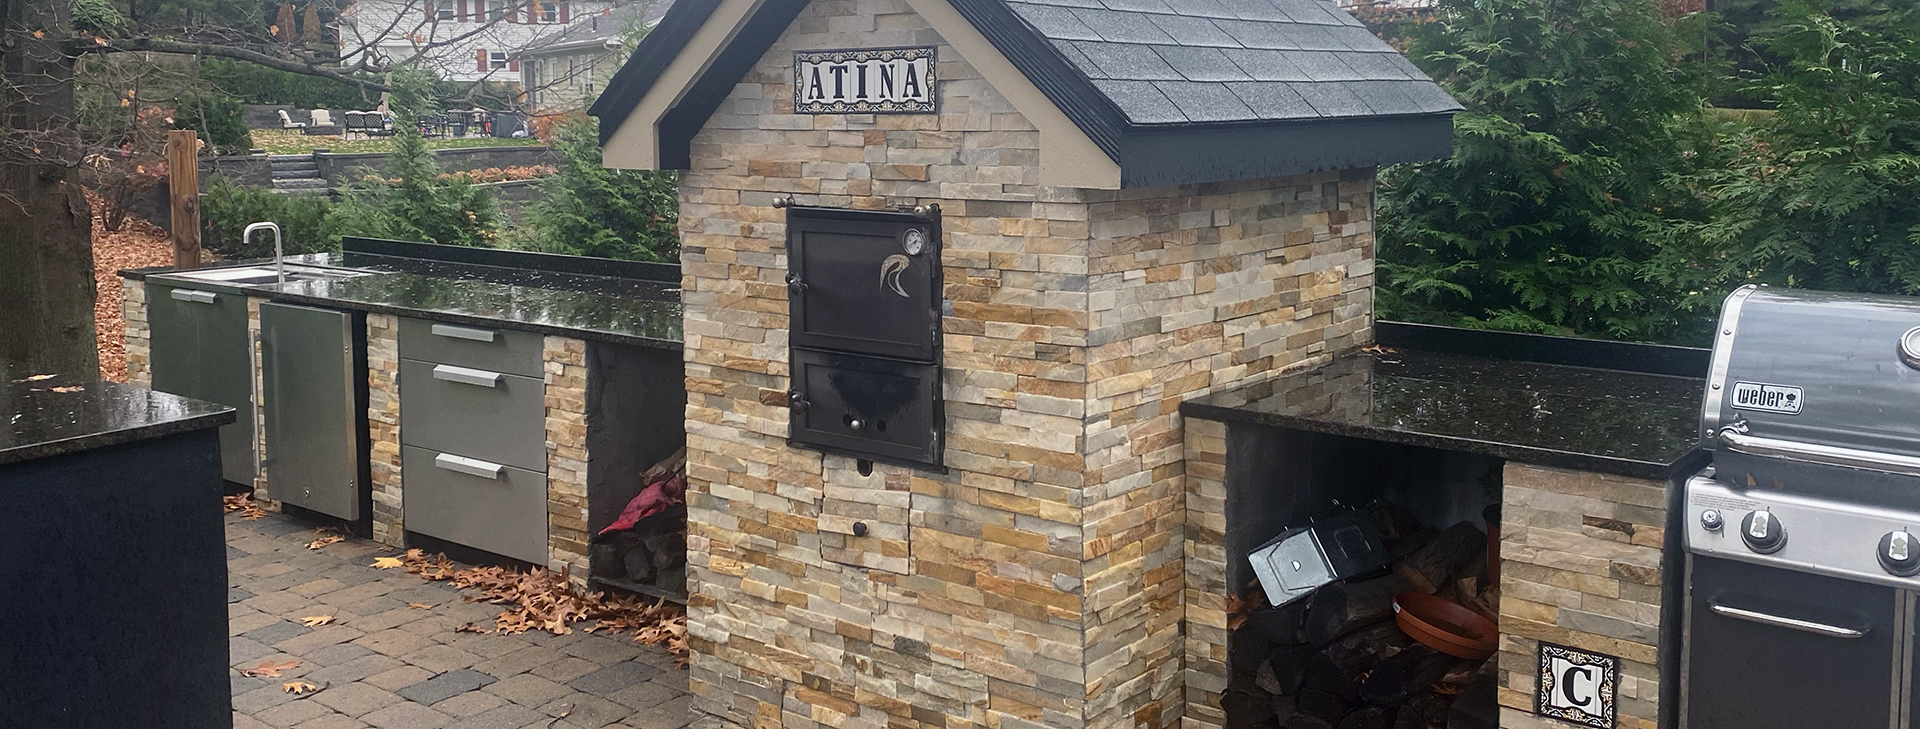 caira landscaping also builds pizza ovens, brick work and patios